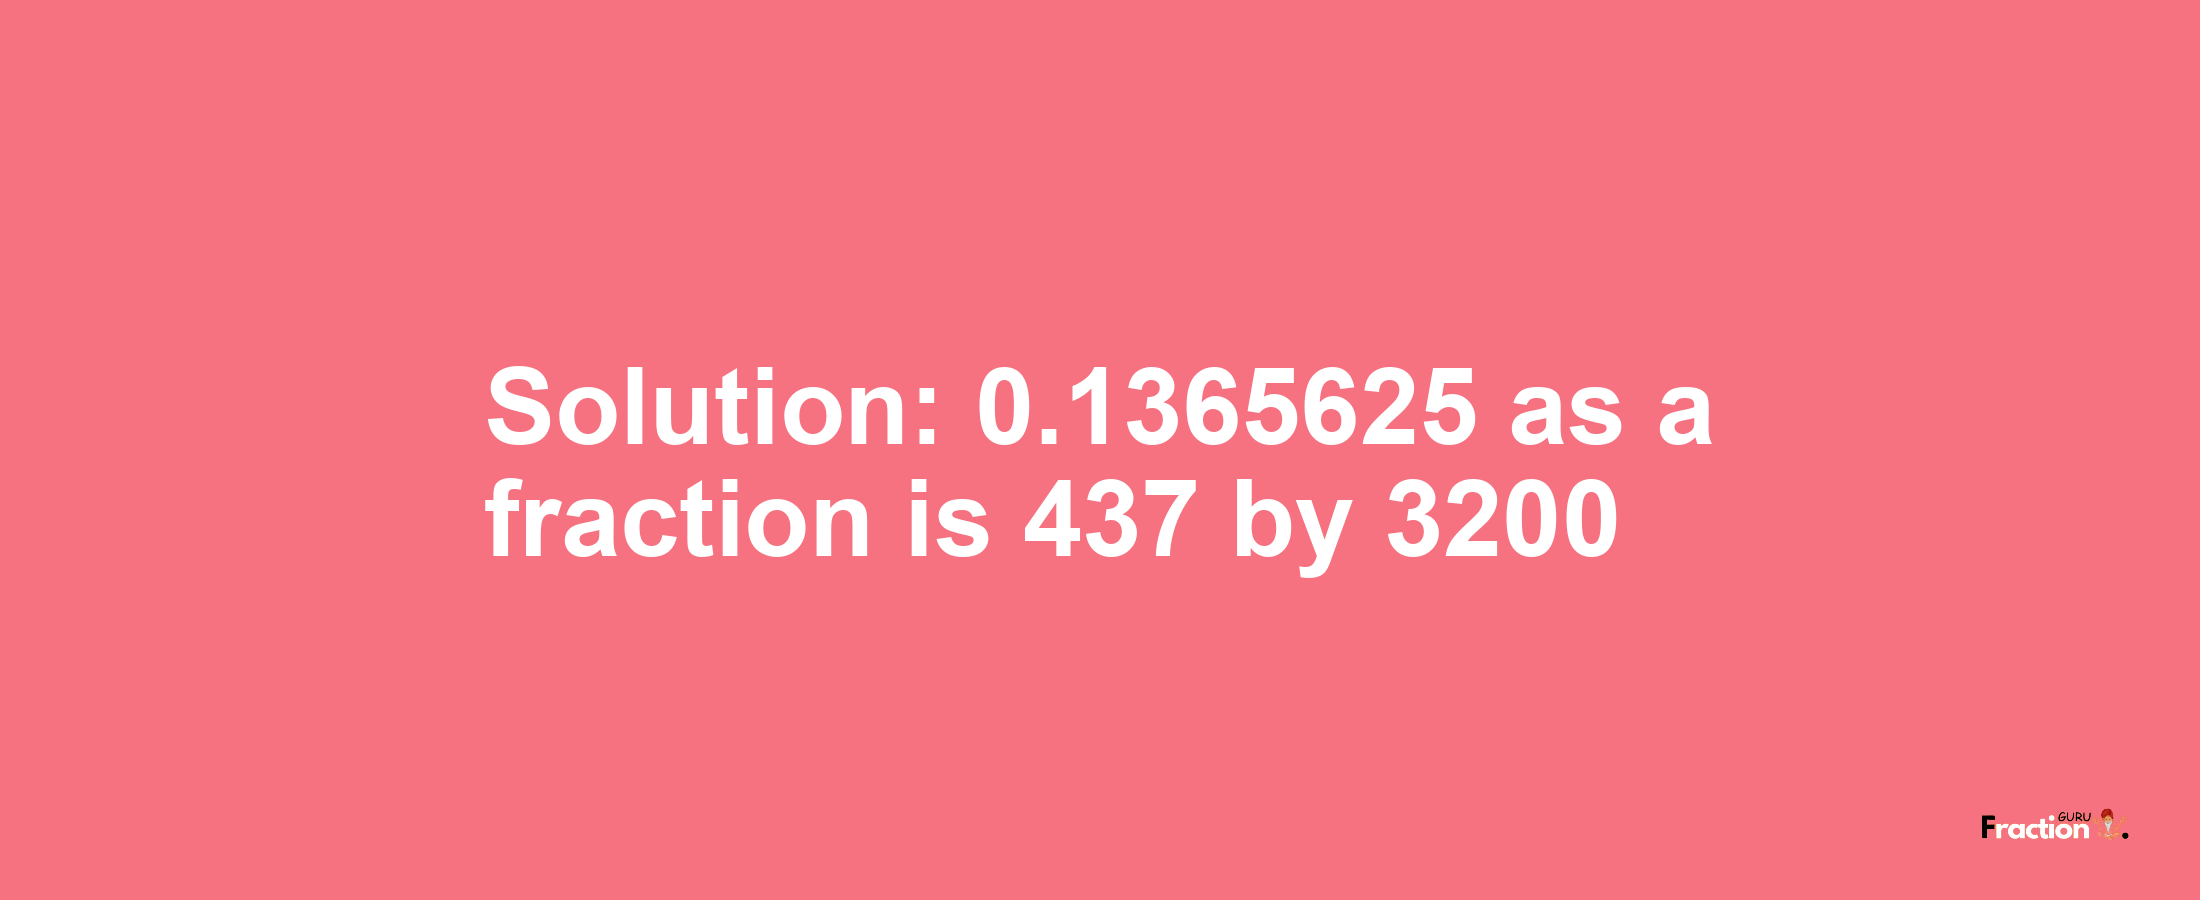 Solution:0.1365625 as a fraction is 437/3200